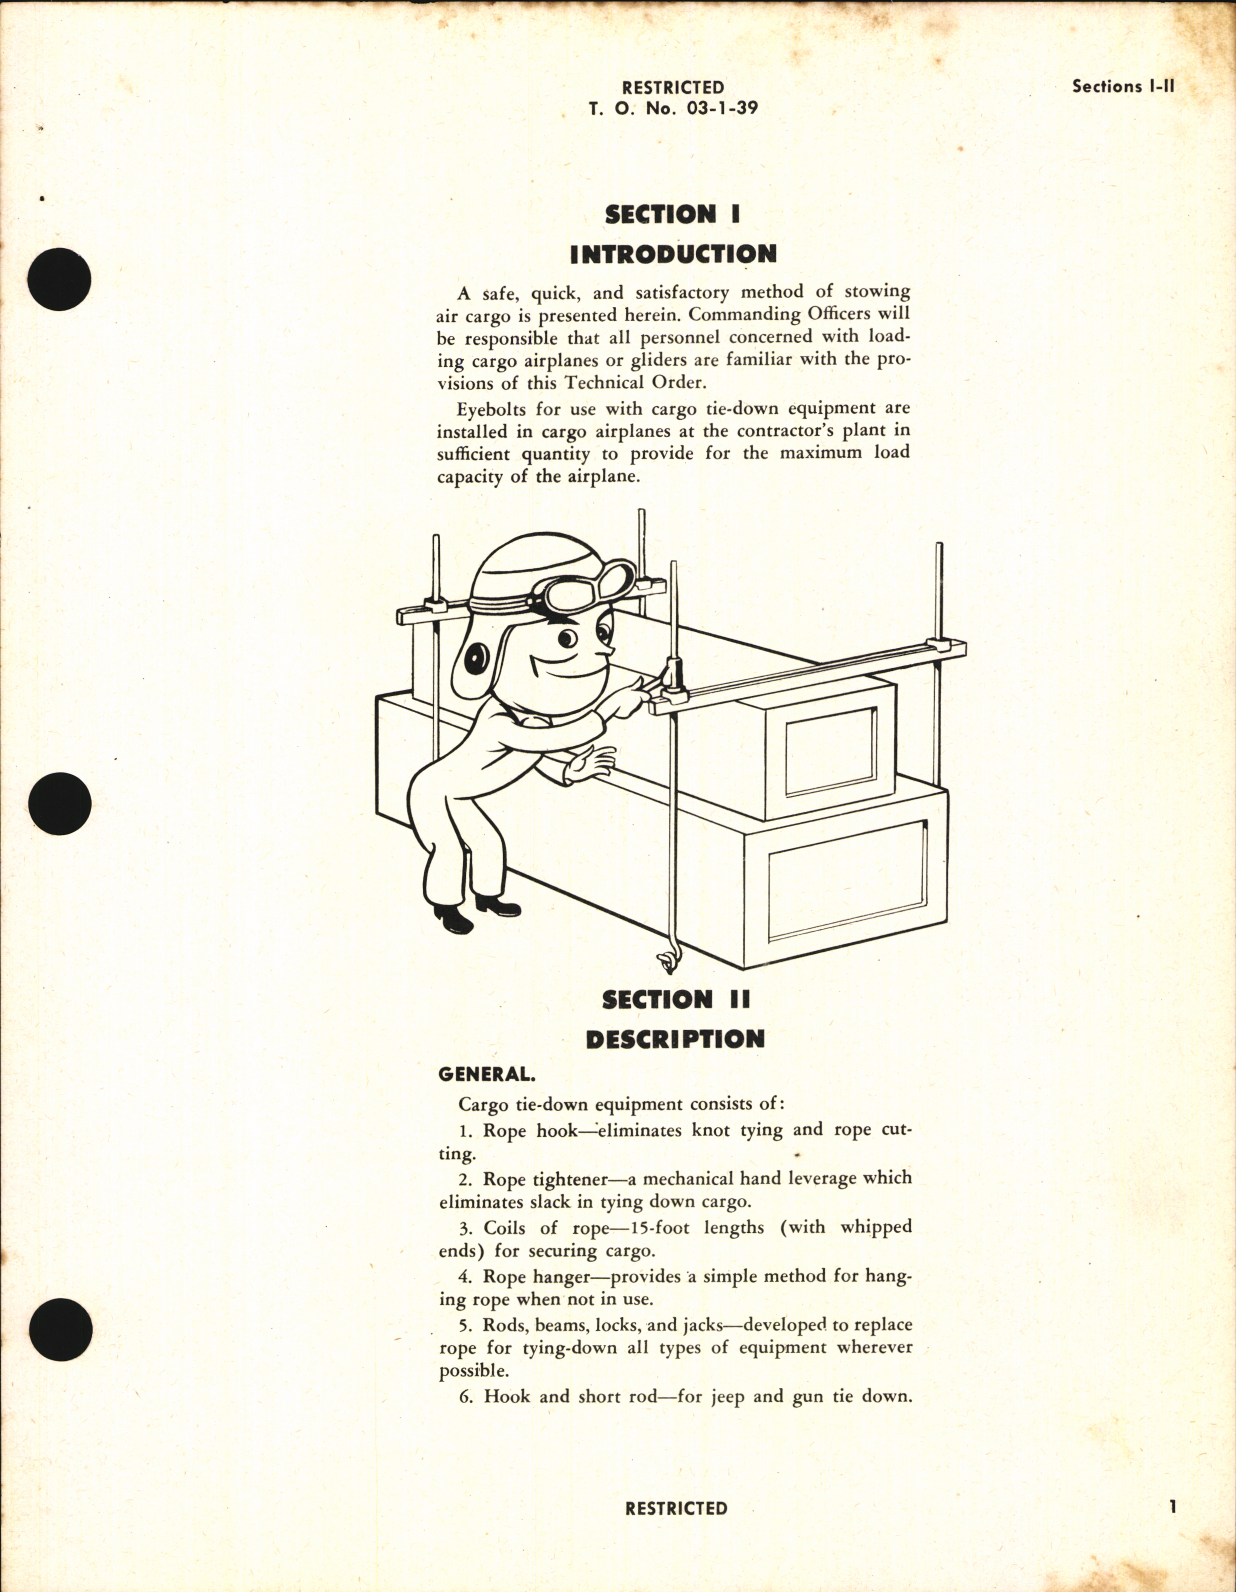 Sample page 5 from AirCorps Library document: Instructions for Operation and Maintenance of Cargo Tie-Down Equipment